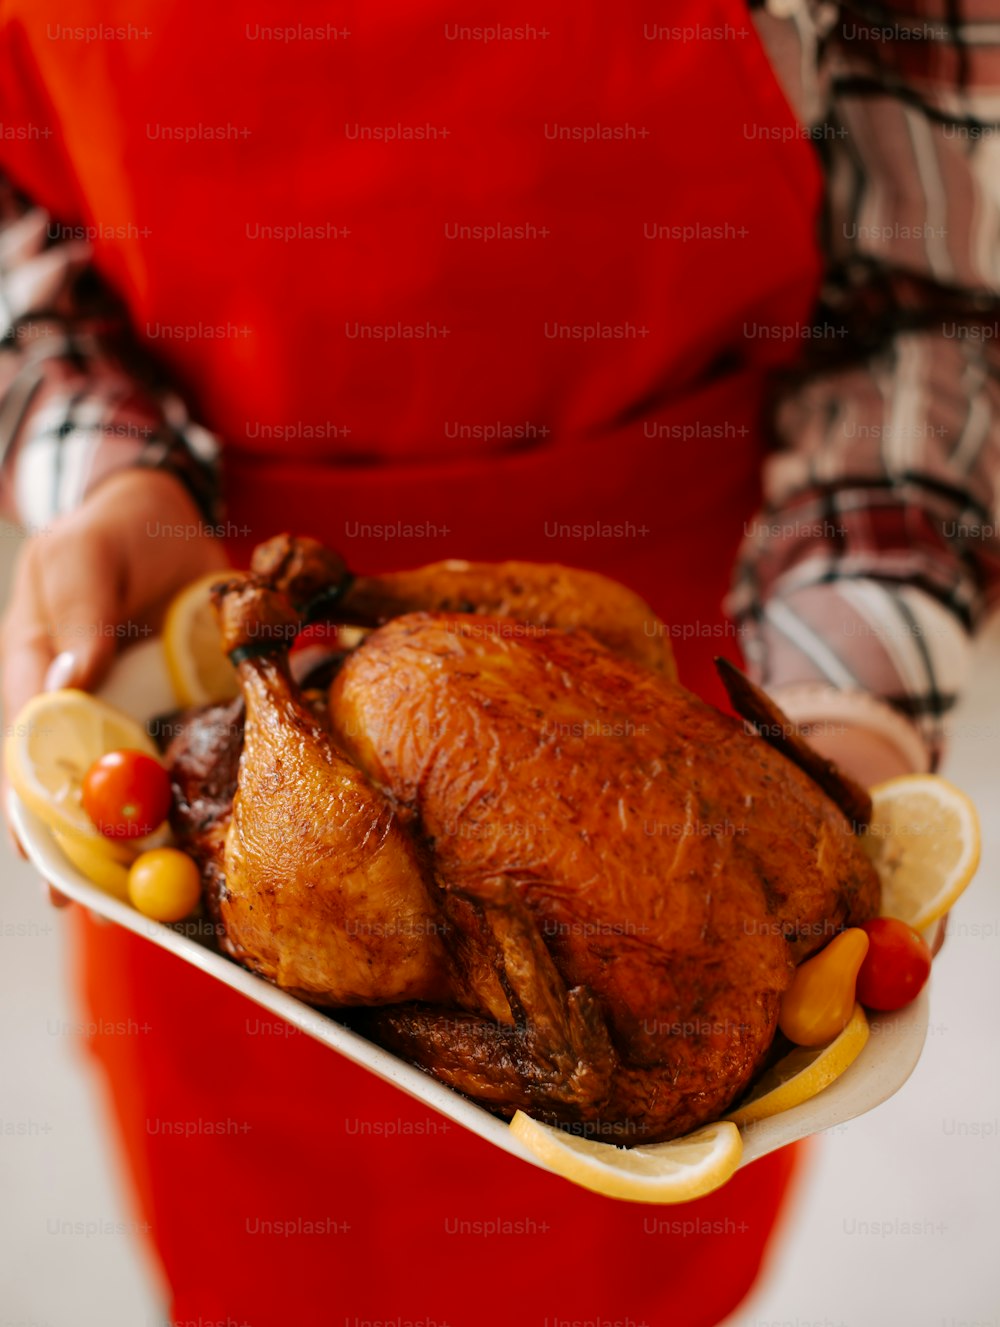 a person in an apron holding a plate with a turkey on it